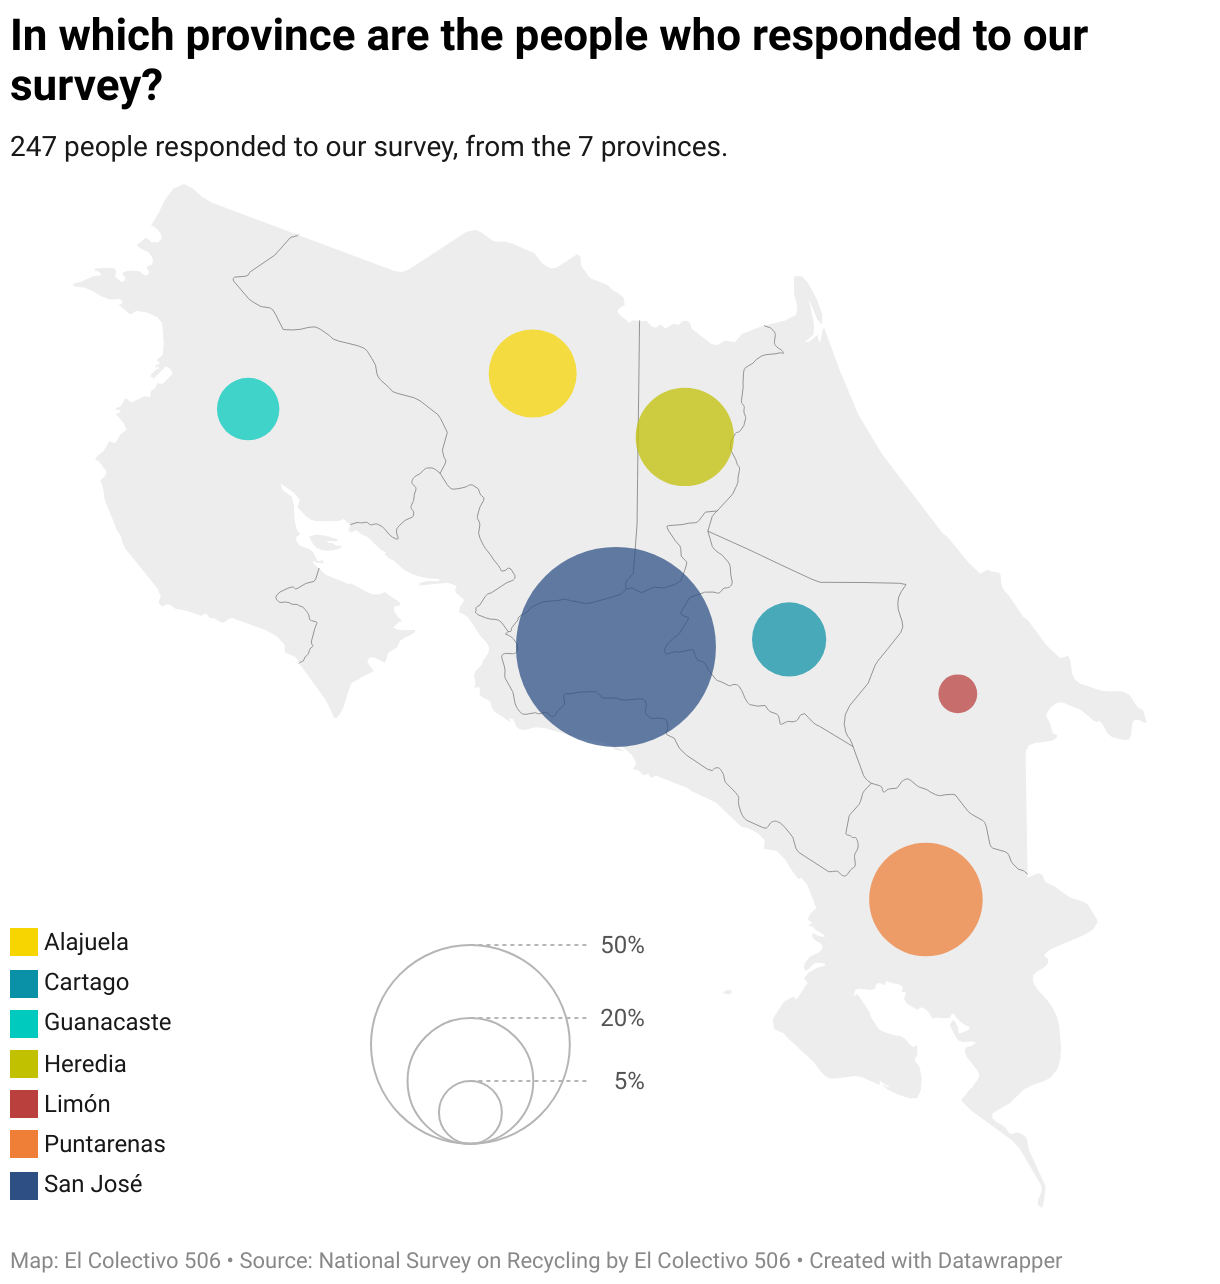 The map shows the distribution of survey responses by province.